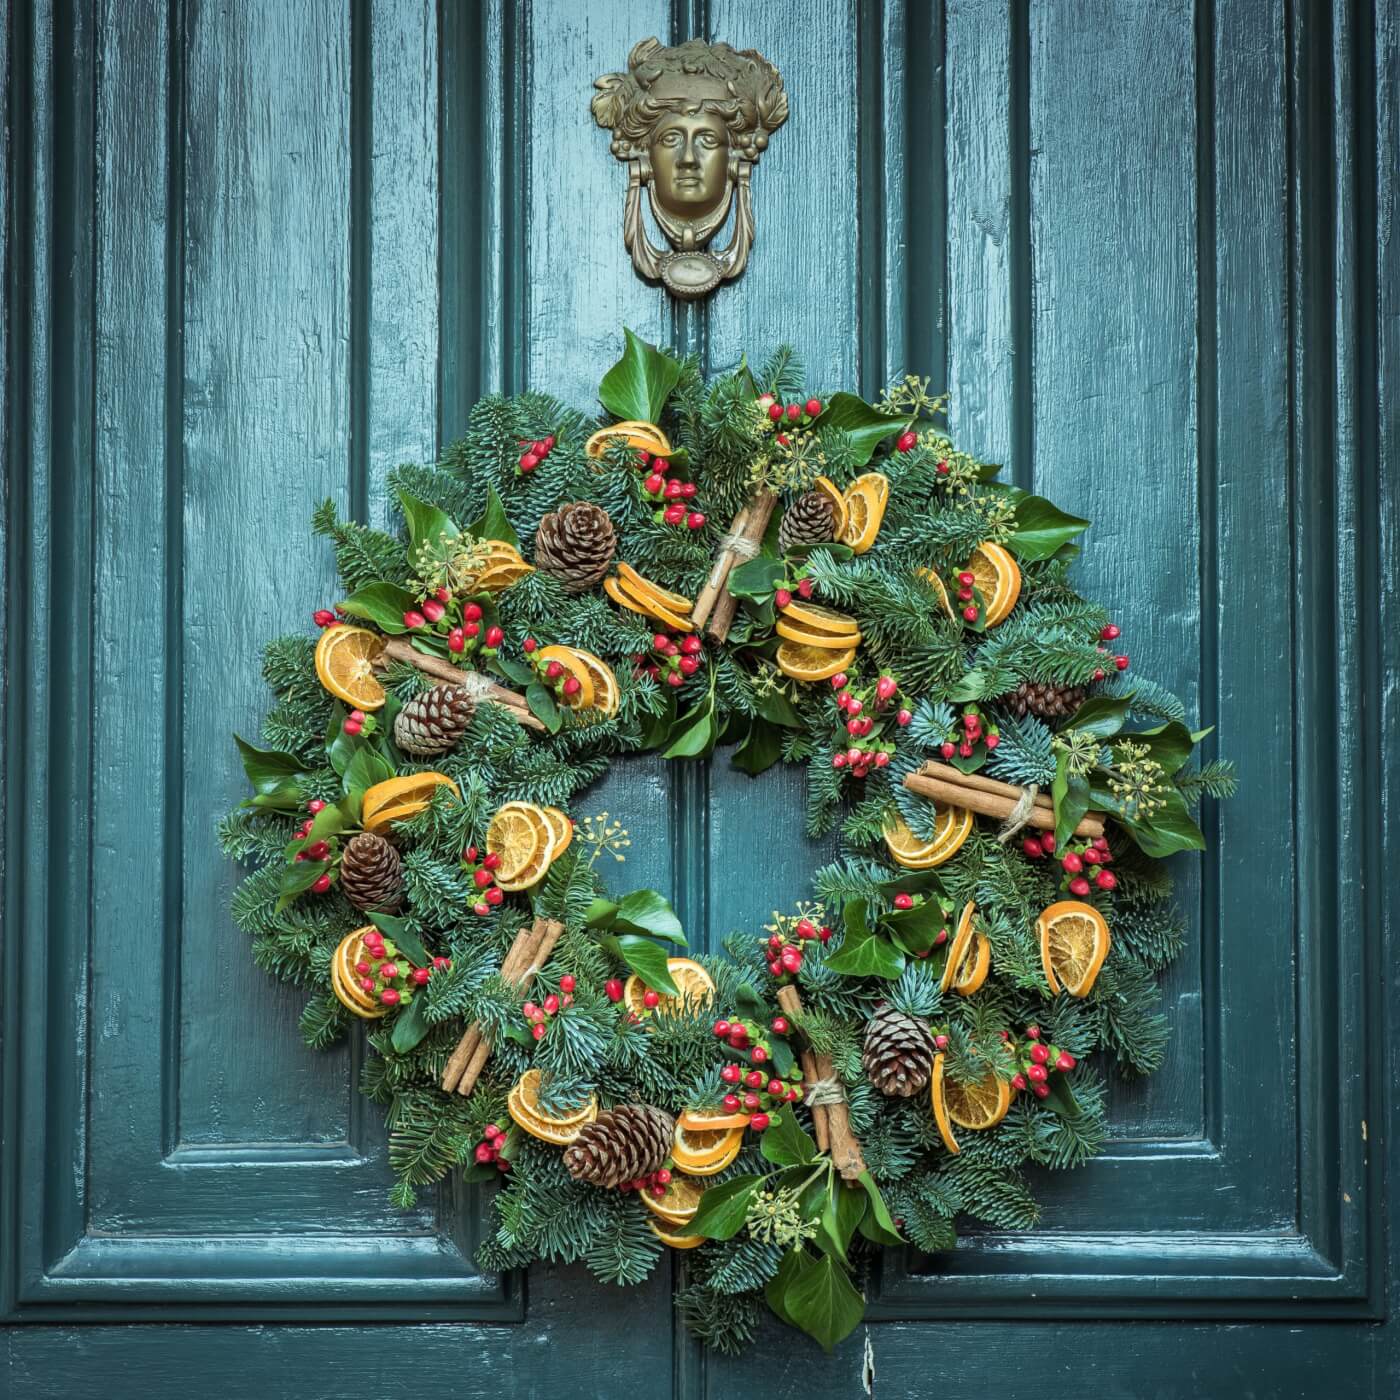 evergreen and dried orange yule wreath hanging on a door